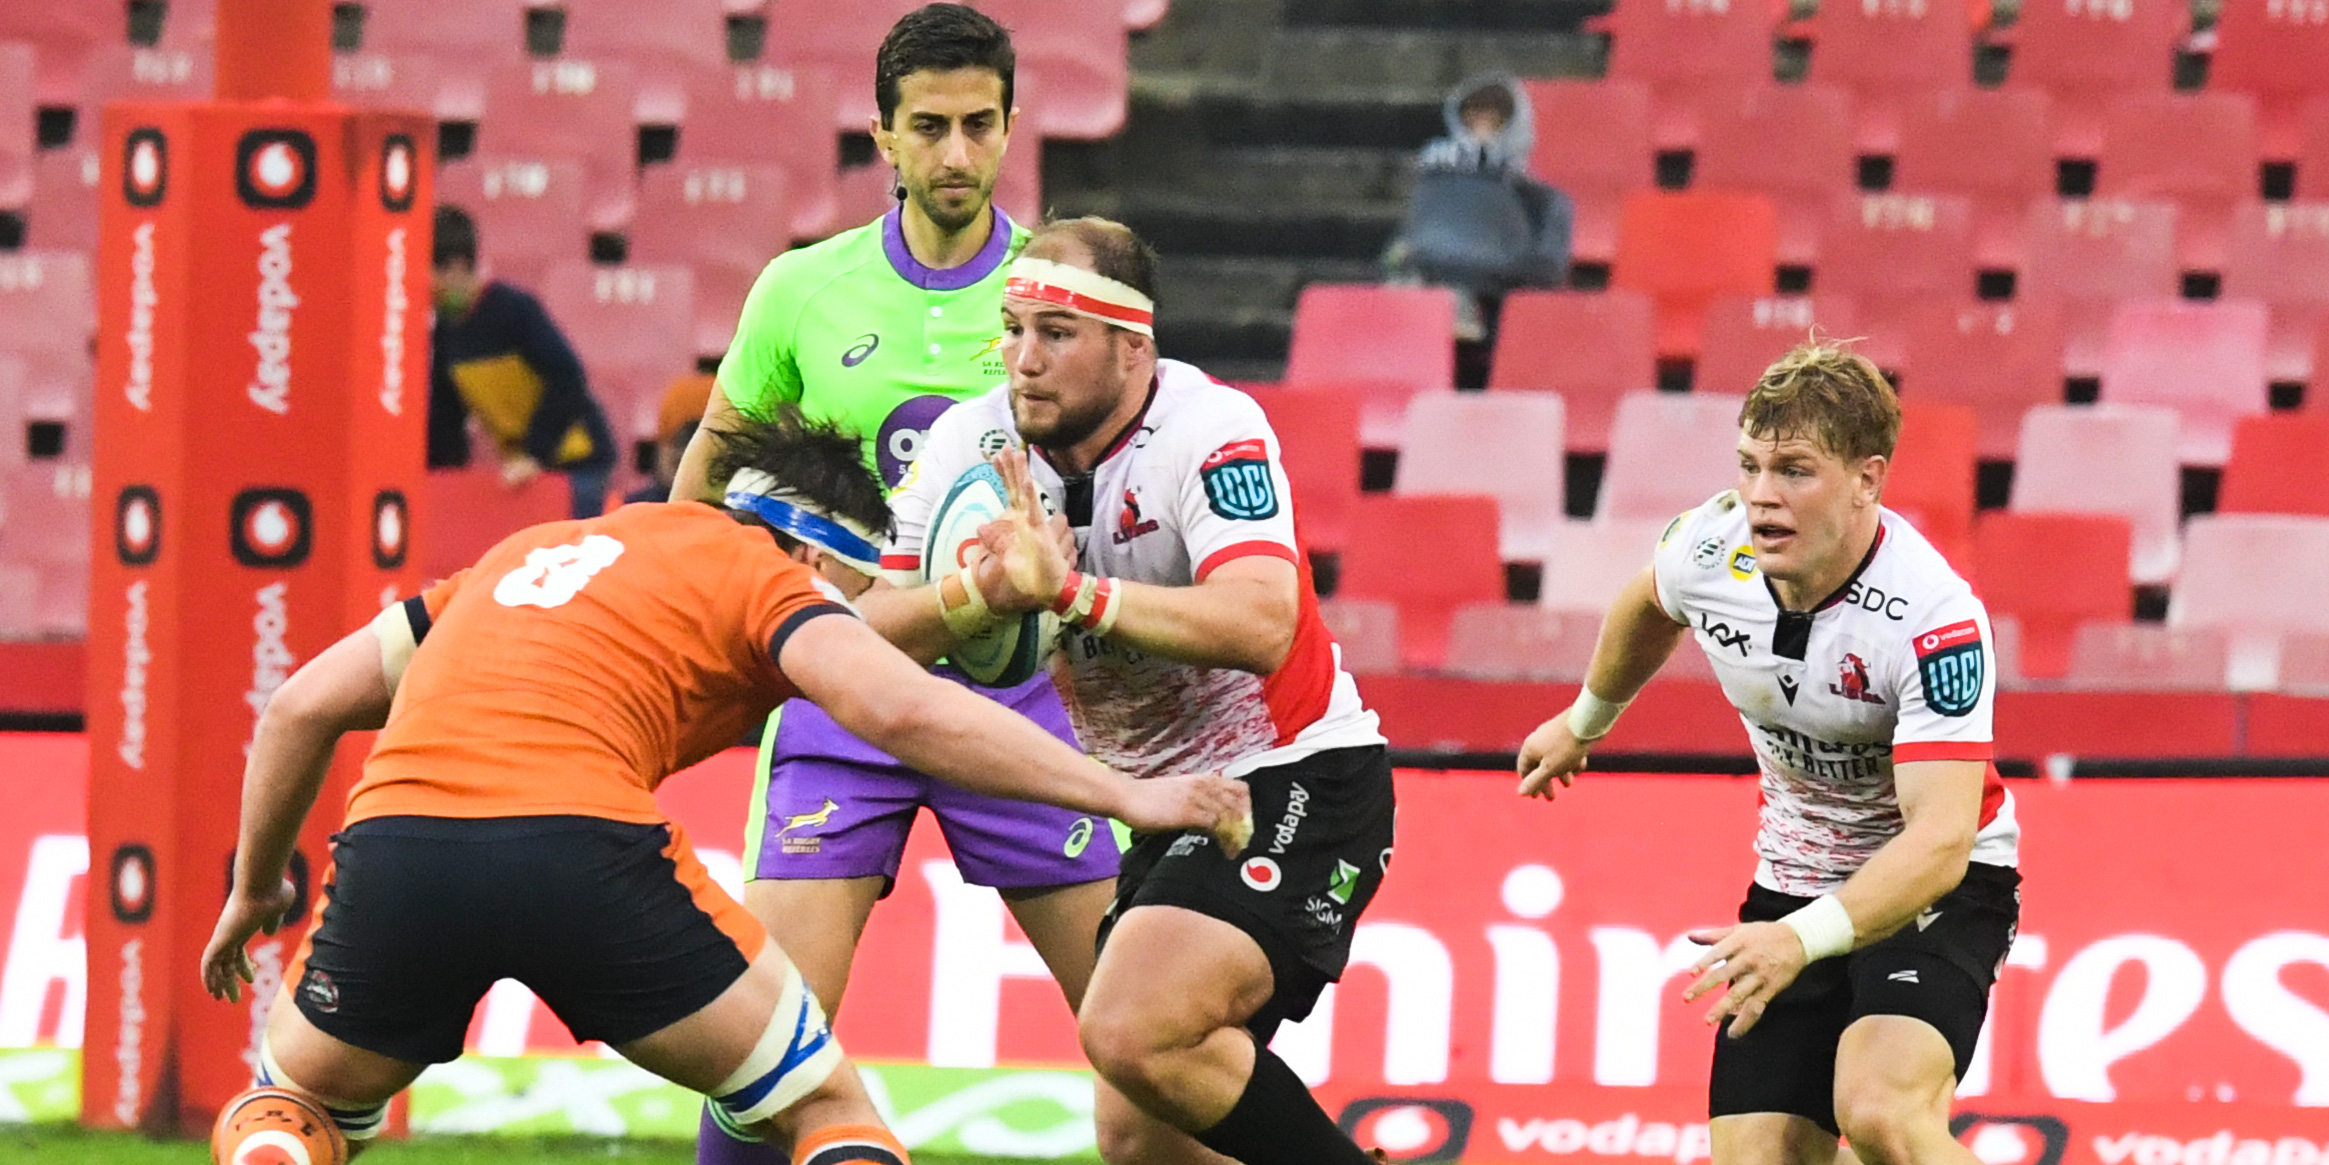 PJ Botha attack for the Emirates Lions in the Vodacom United Rugby Championship